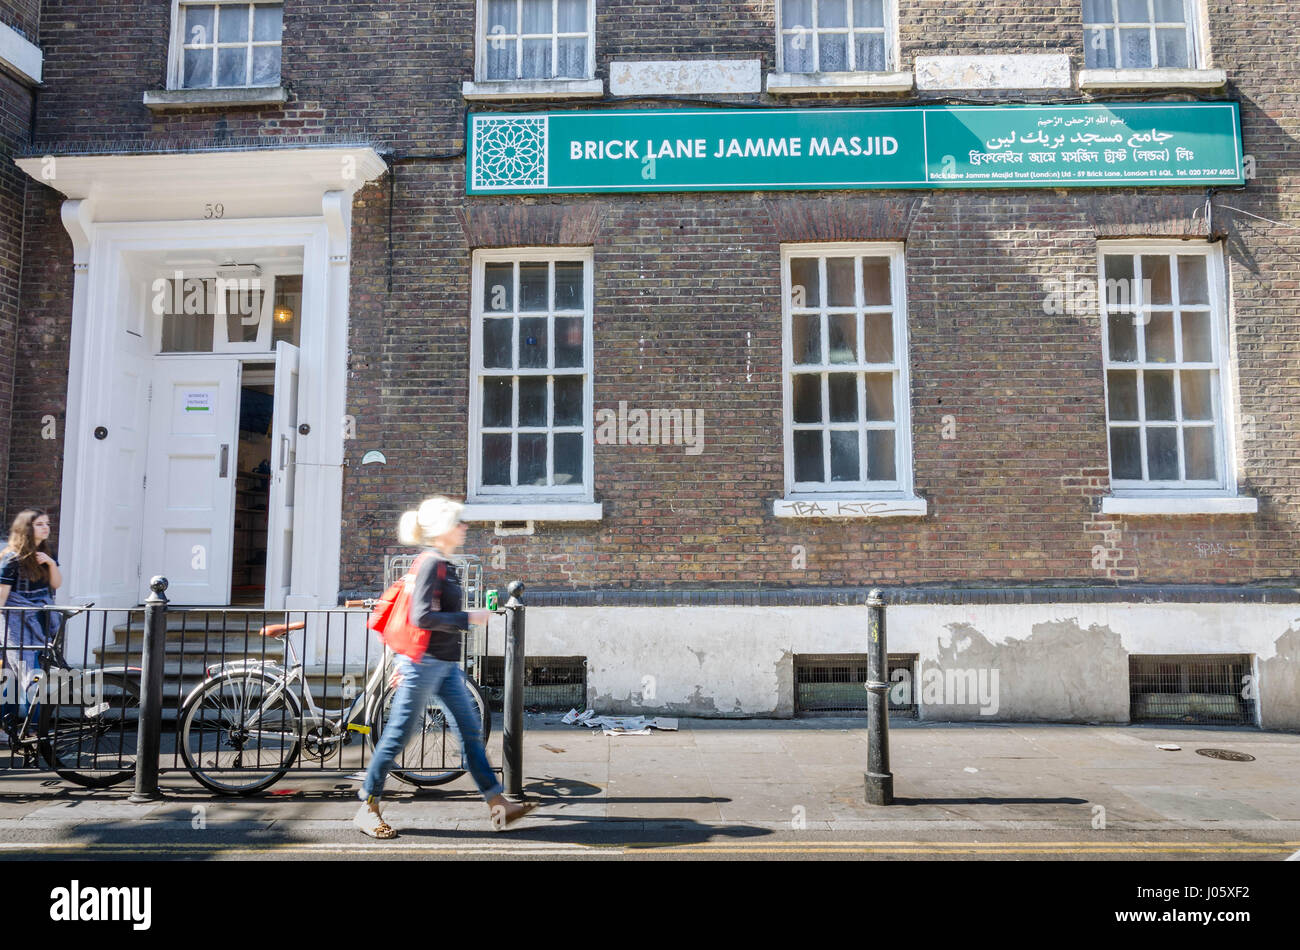 Brick Lane Jamme Masjid - a place of worship for followers of the Islam faith. Stock Photo